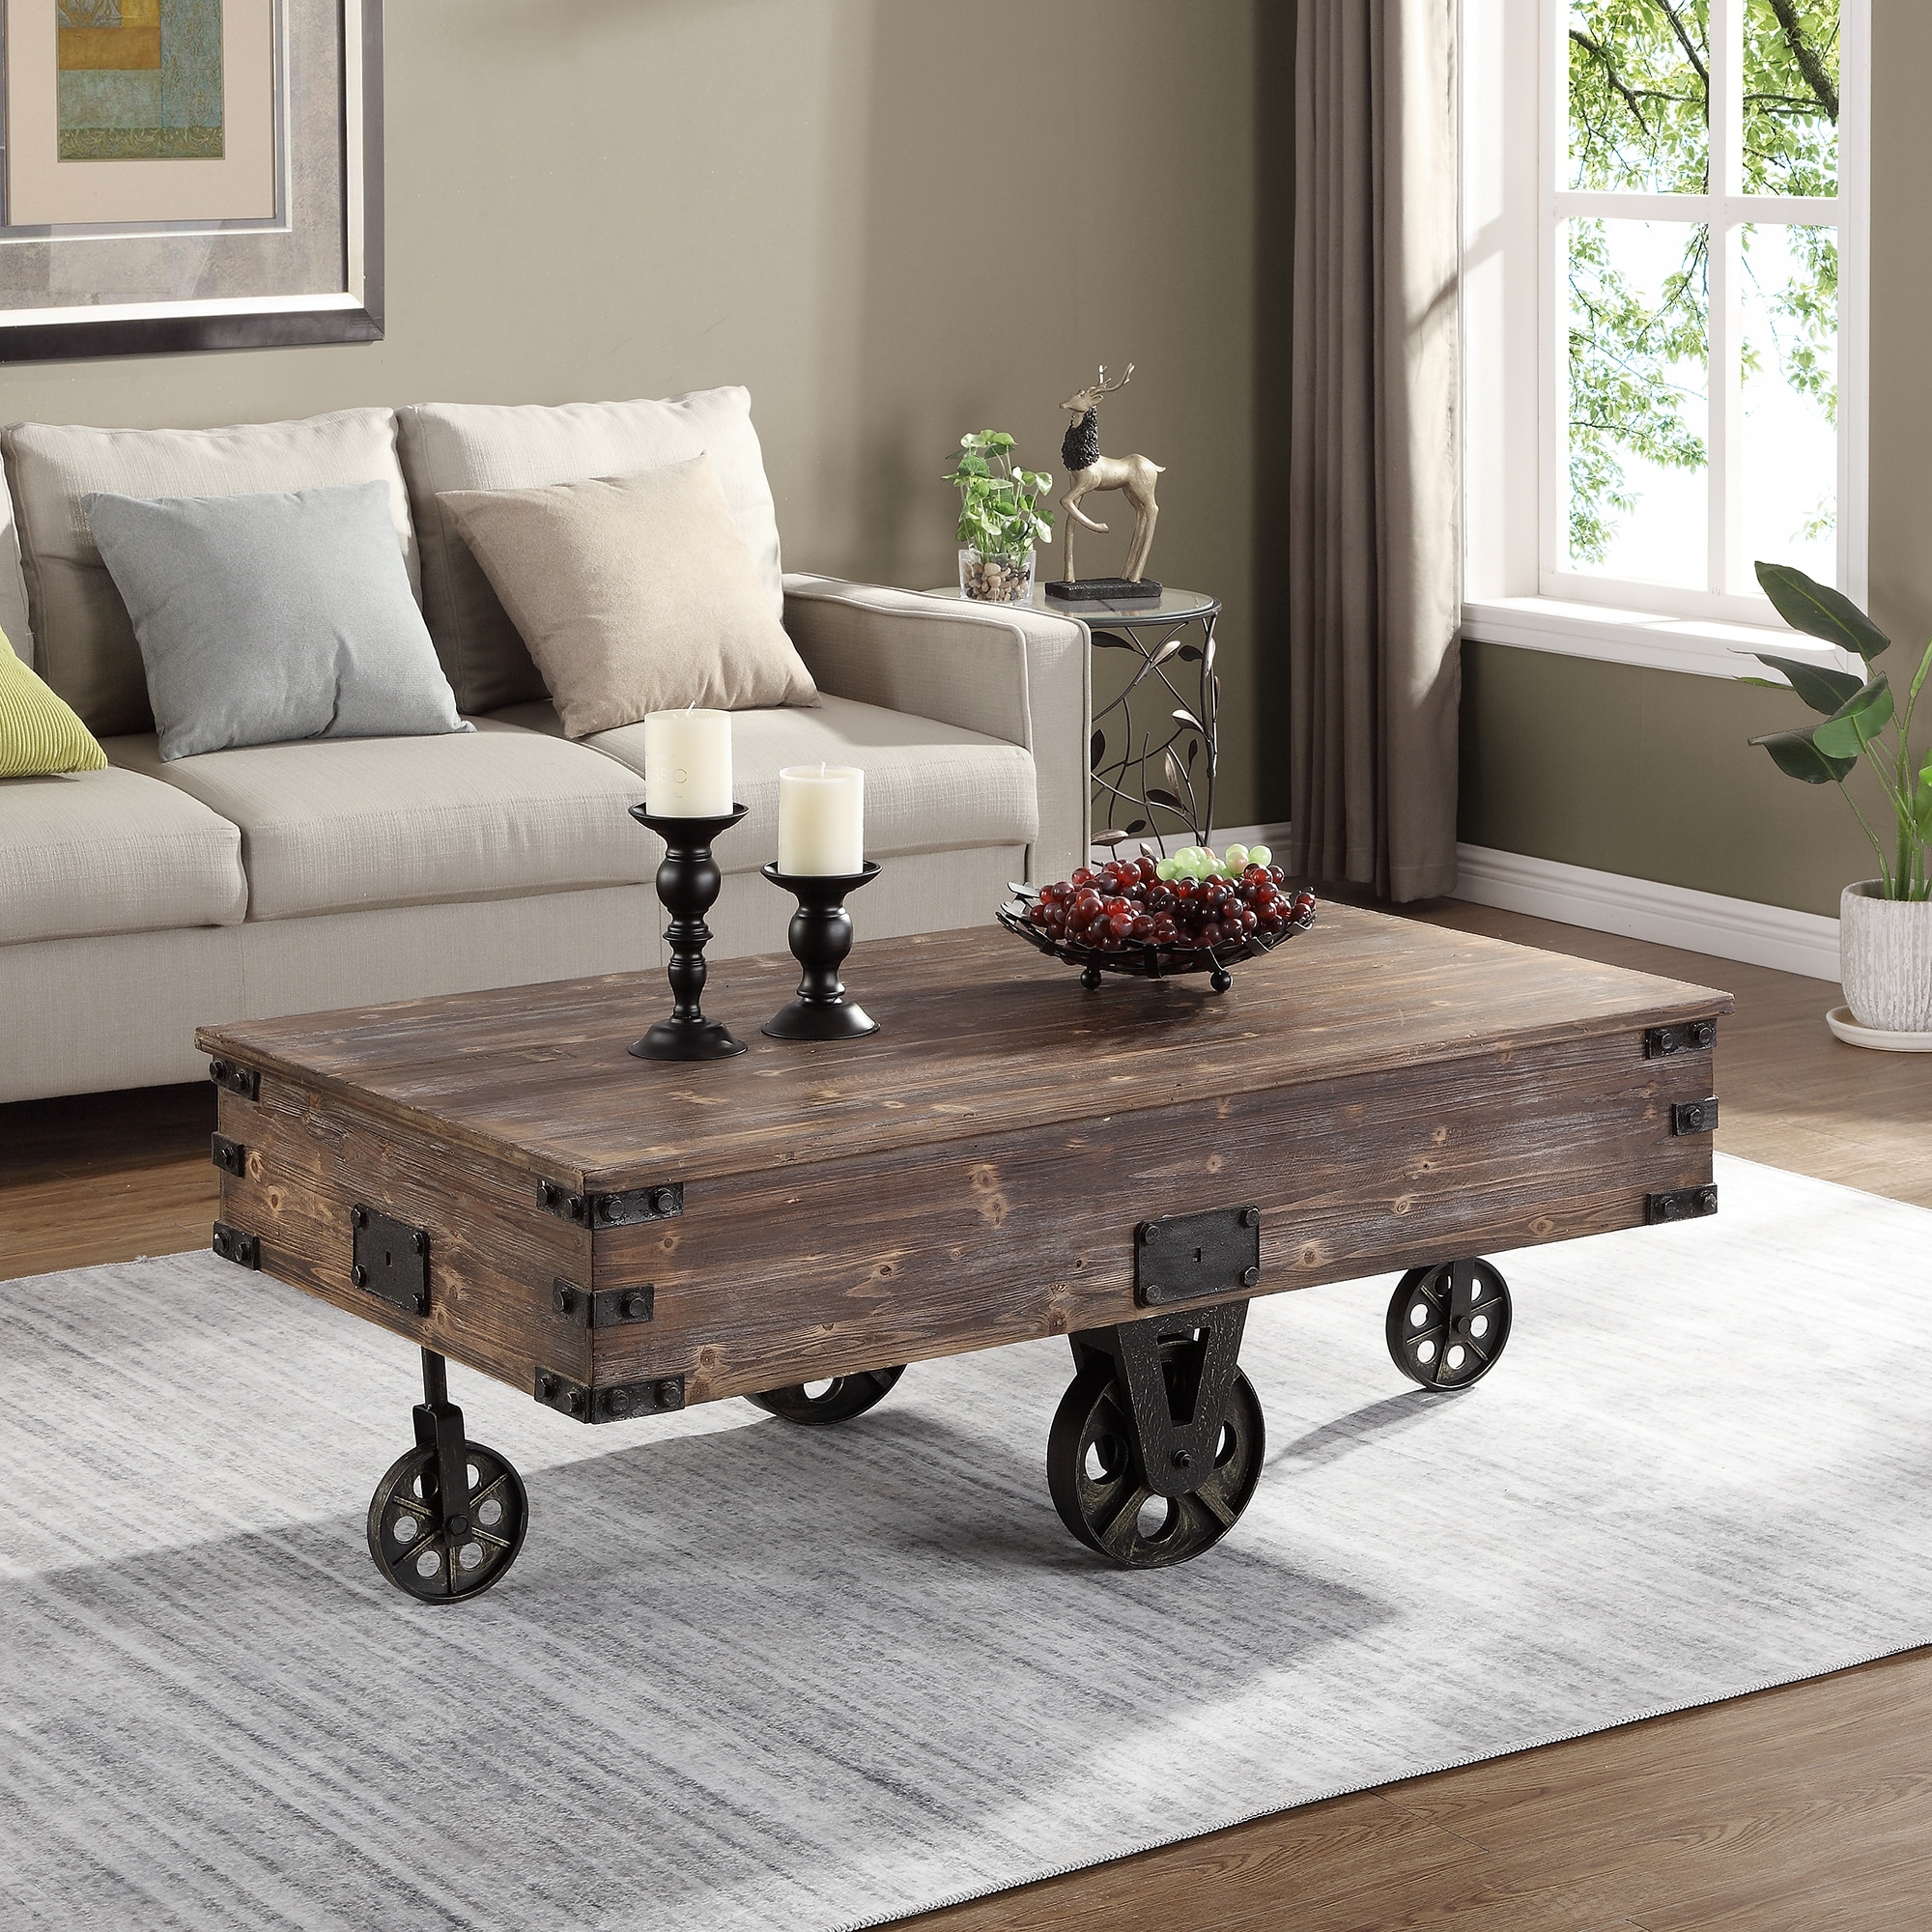 Shop Black Friday Deals On Firstime Co Factory Farmhouse Cart Coffee Table American Crafted Rustic Espresso Wood 47 25 X 27 5 X 18 In Overstock 27982473